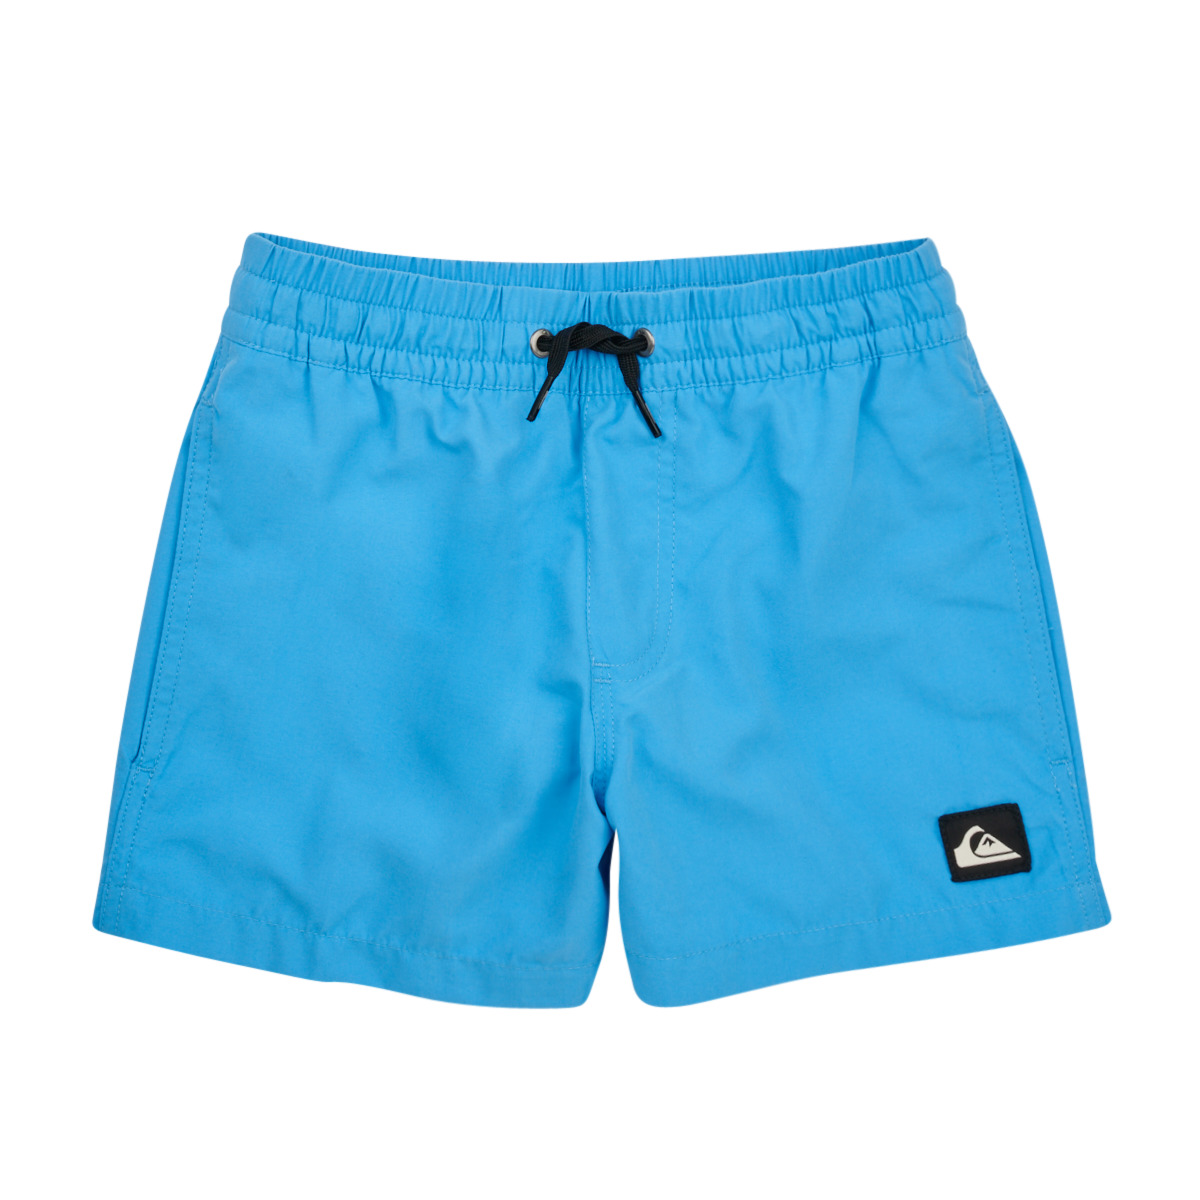 Quiksilver Bleu EVERYDAY VOLLEY YOUTH 13 k4dDBx4s